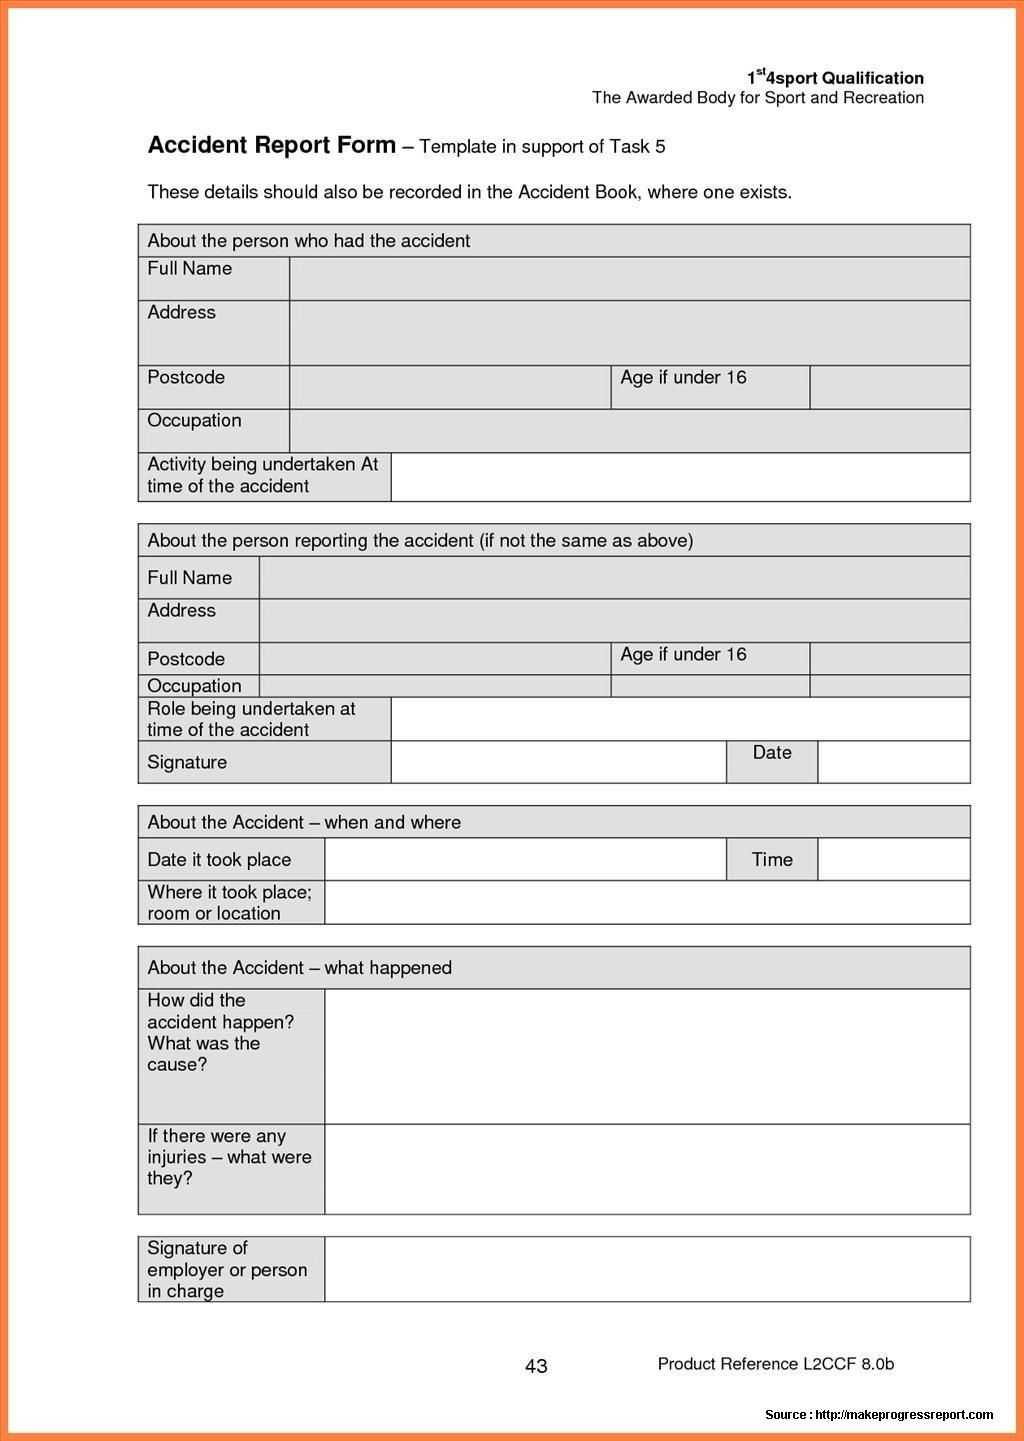 Construction Accident Report Form Sample | Incident Report Throughout Generic Incident Report Template